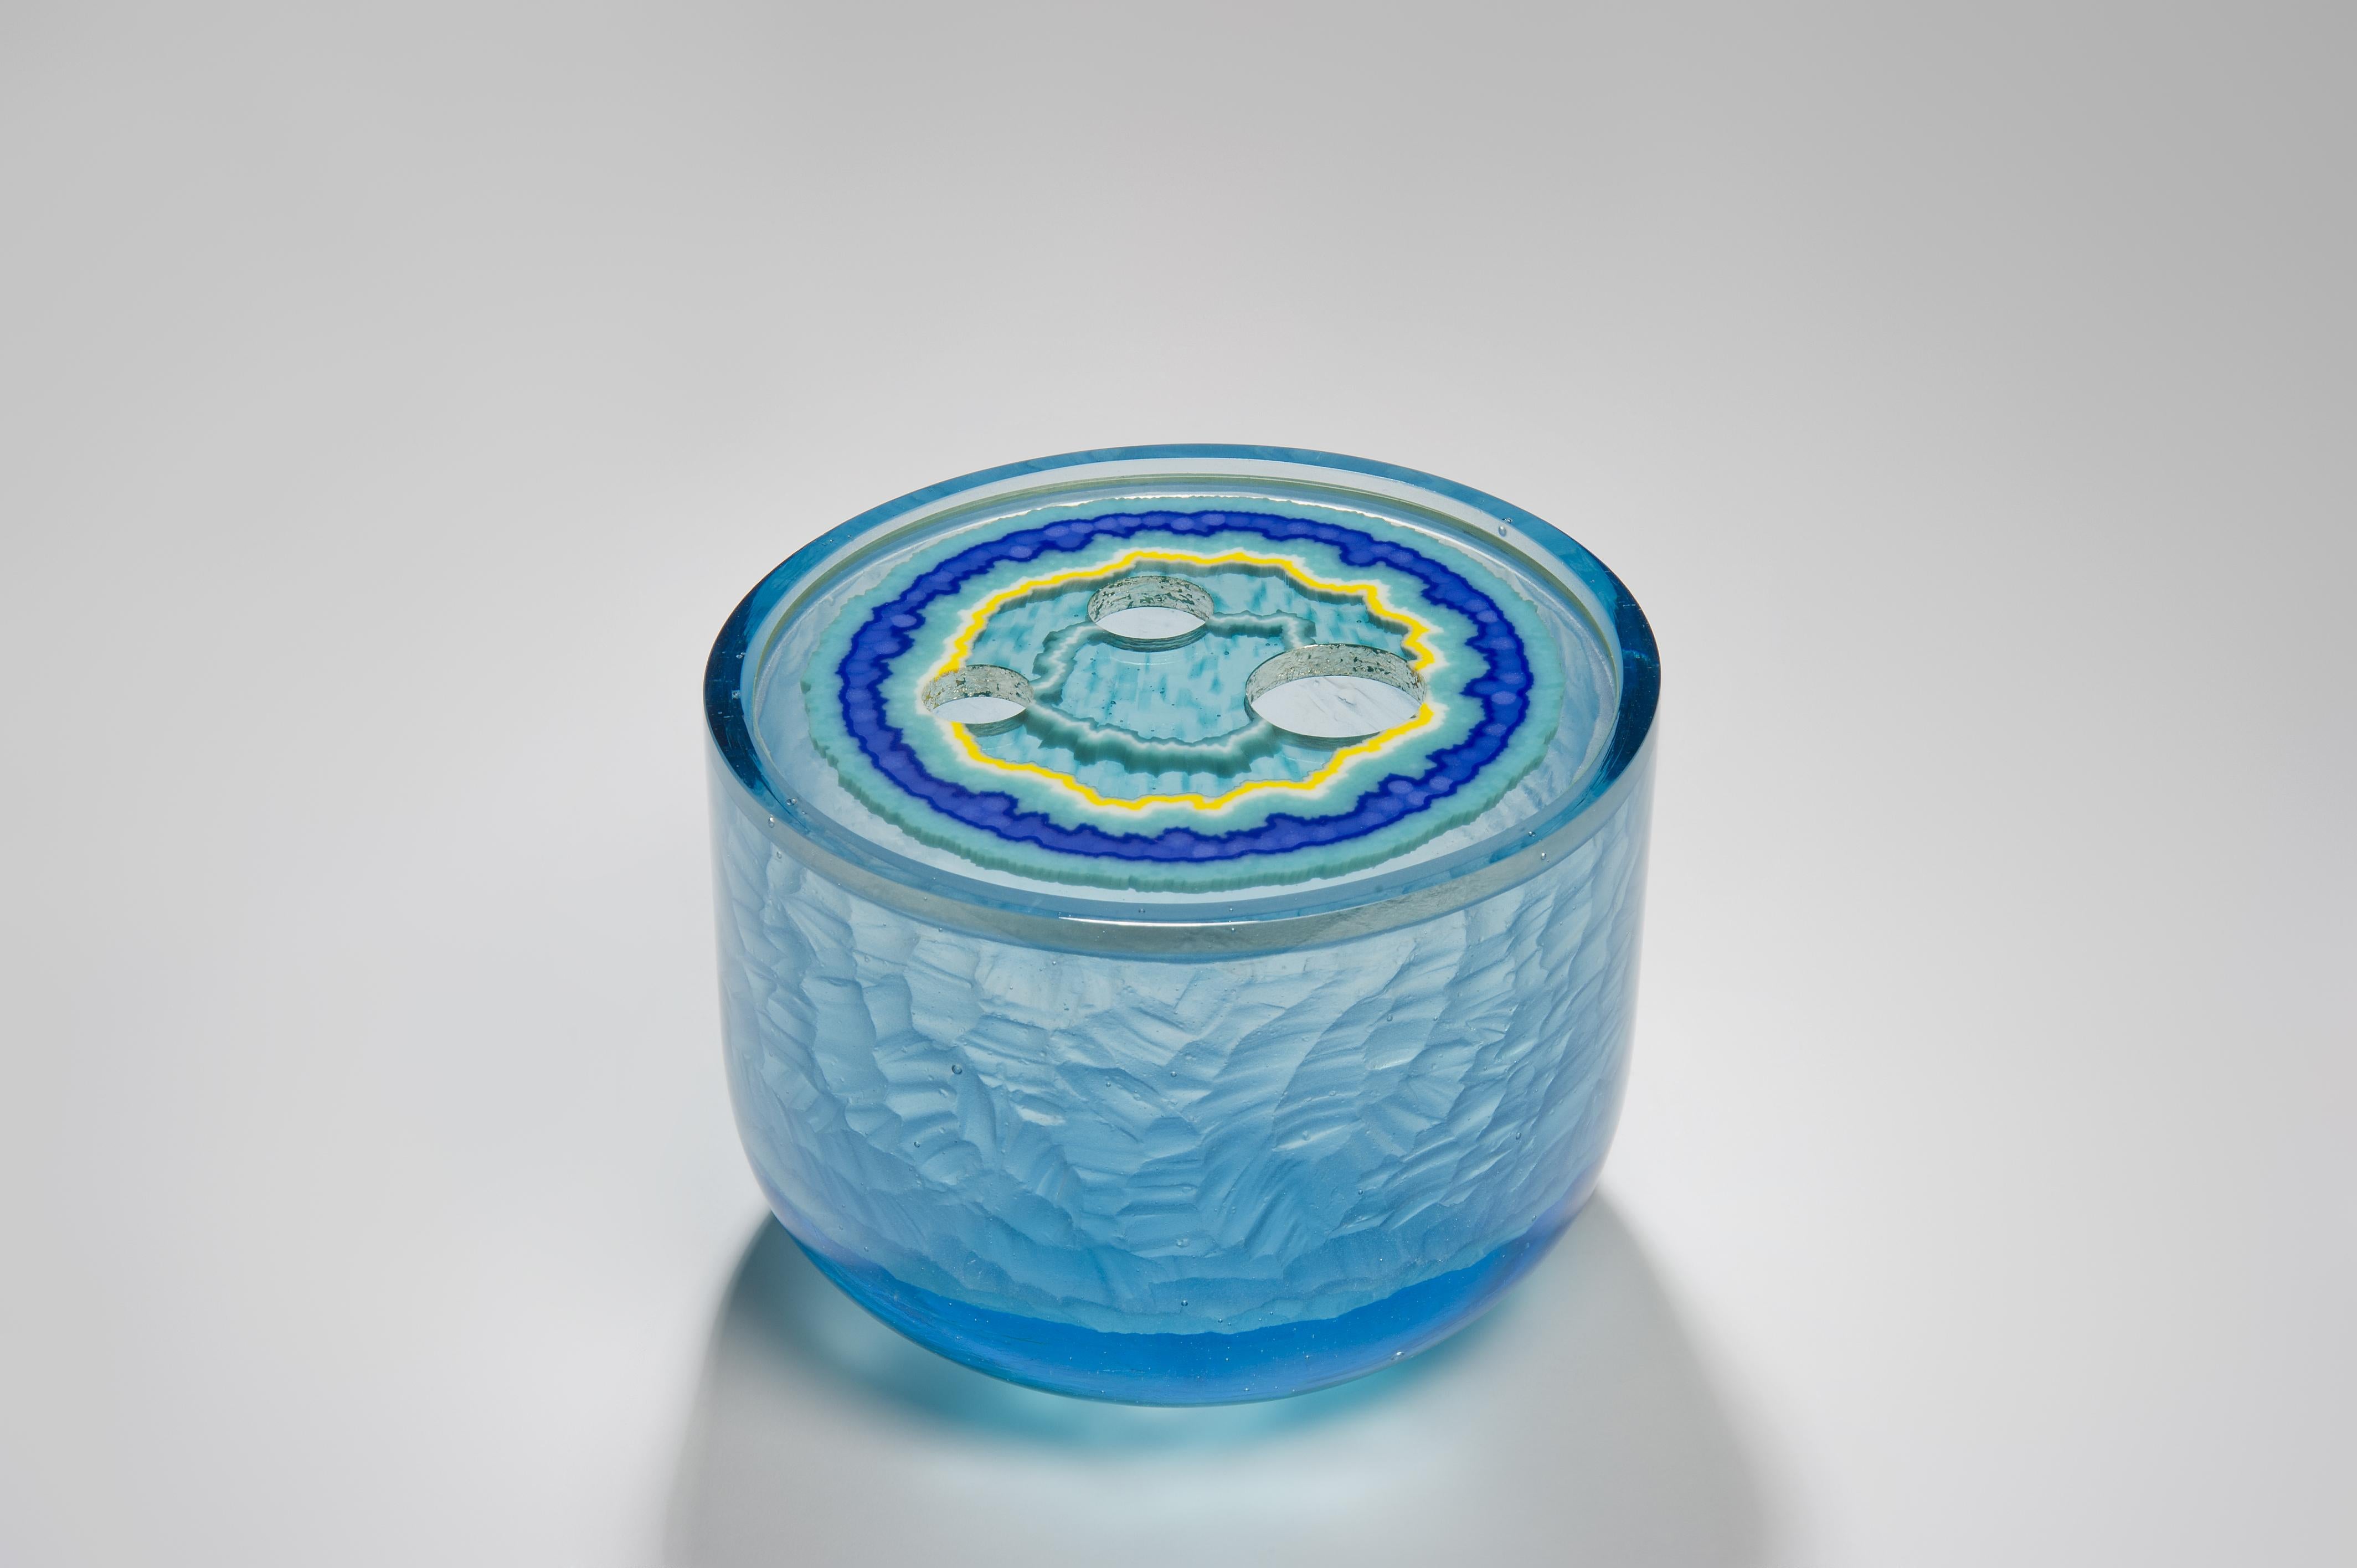 Aquamarine Agate Geode is a unique aqua, turquoise, blue and yellow sculptural piece created from cast glass by the British artist Angela Jarman. Using the lost wax technique, the base is cast pale blue lead crystal. The top disc insert is created